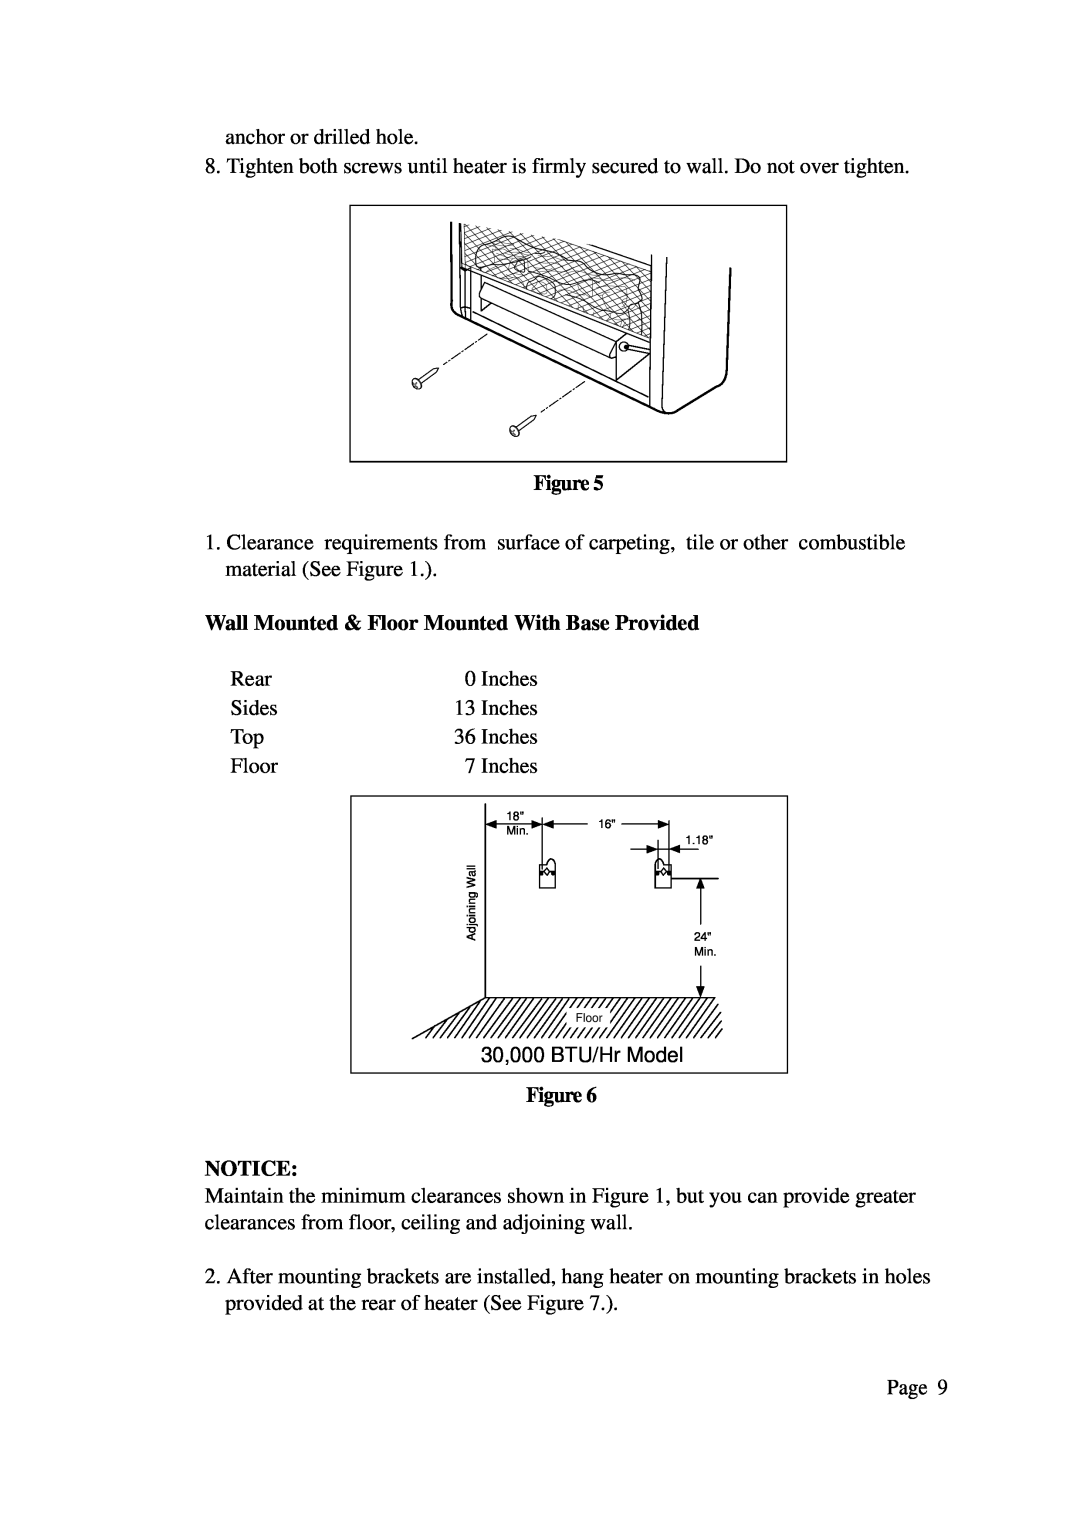 Gas-Fired Products 602-30, KLH601 installation manual Wall Mounted & Floor Mounted With Base Provided, Figure NOTICE 